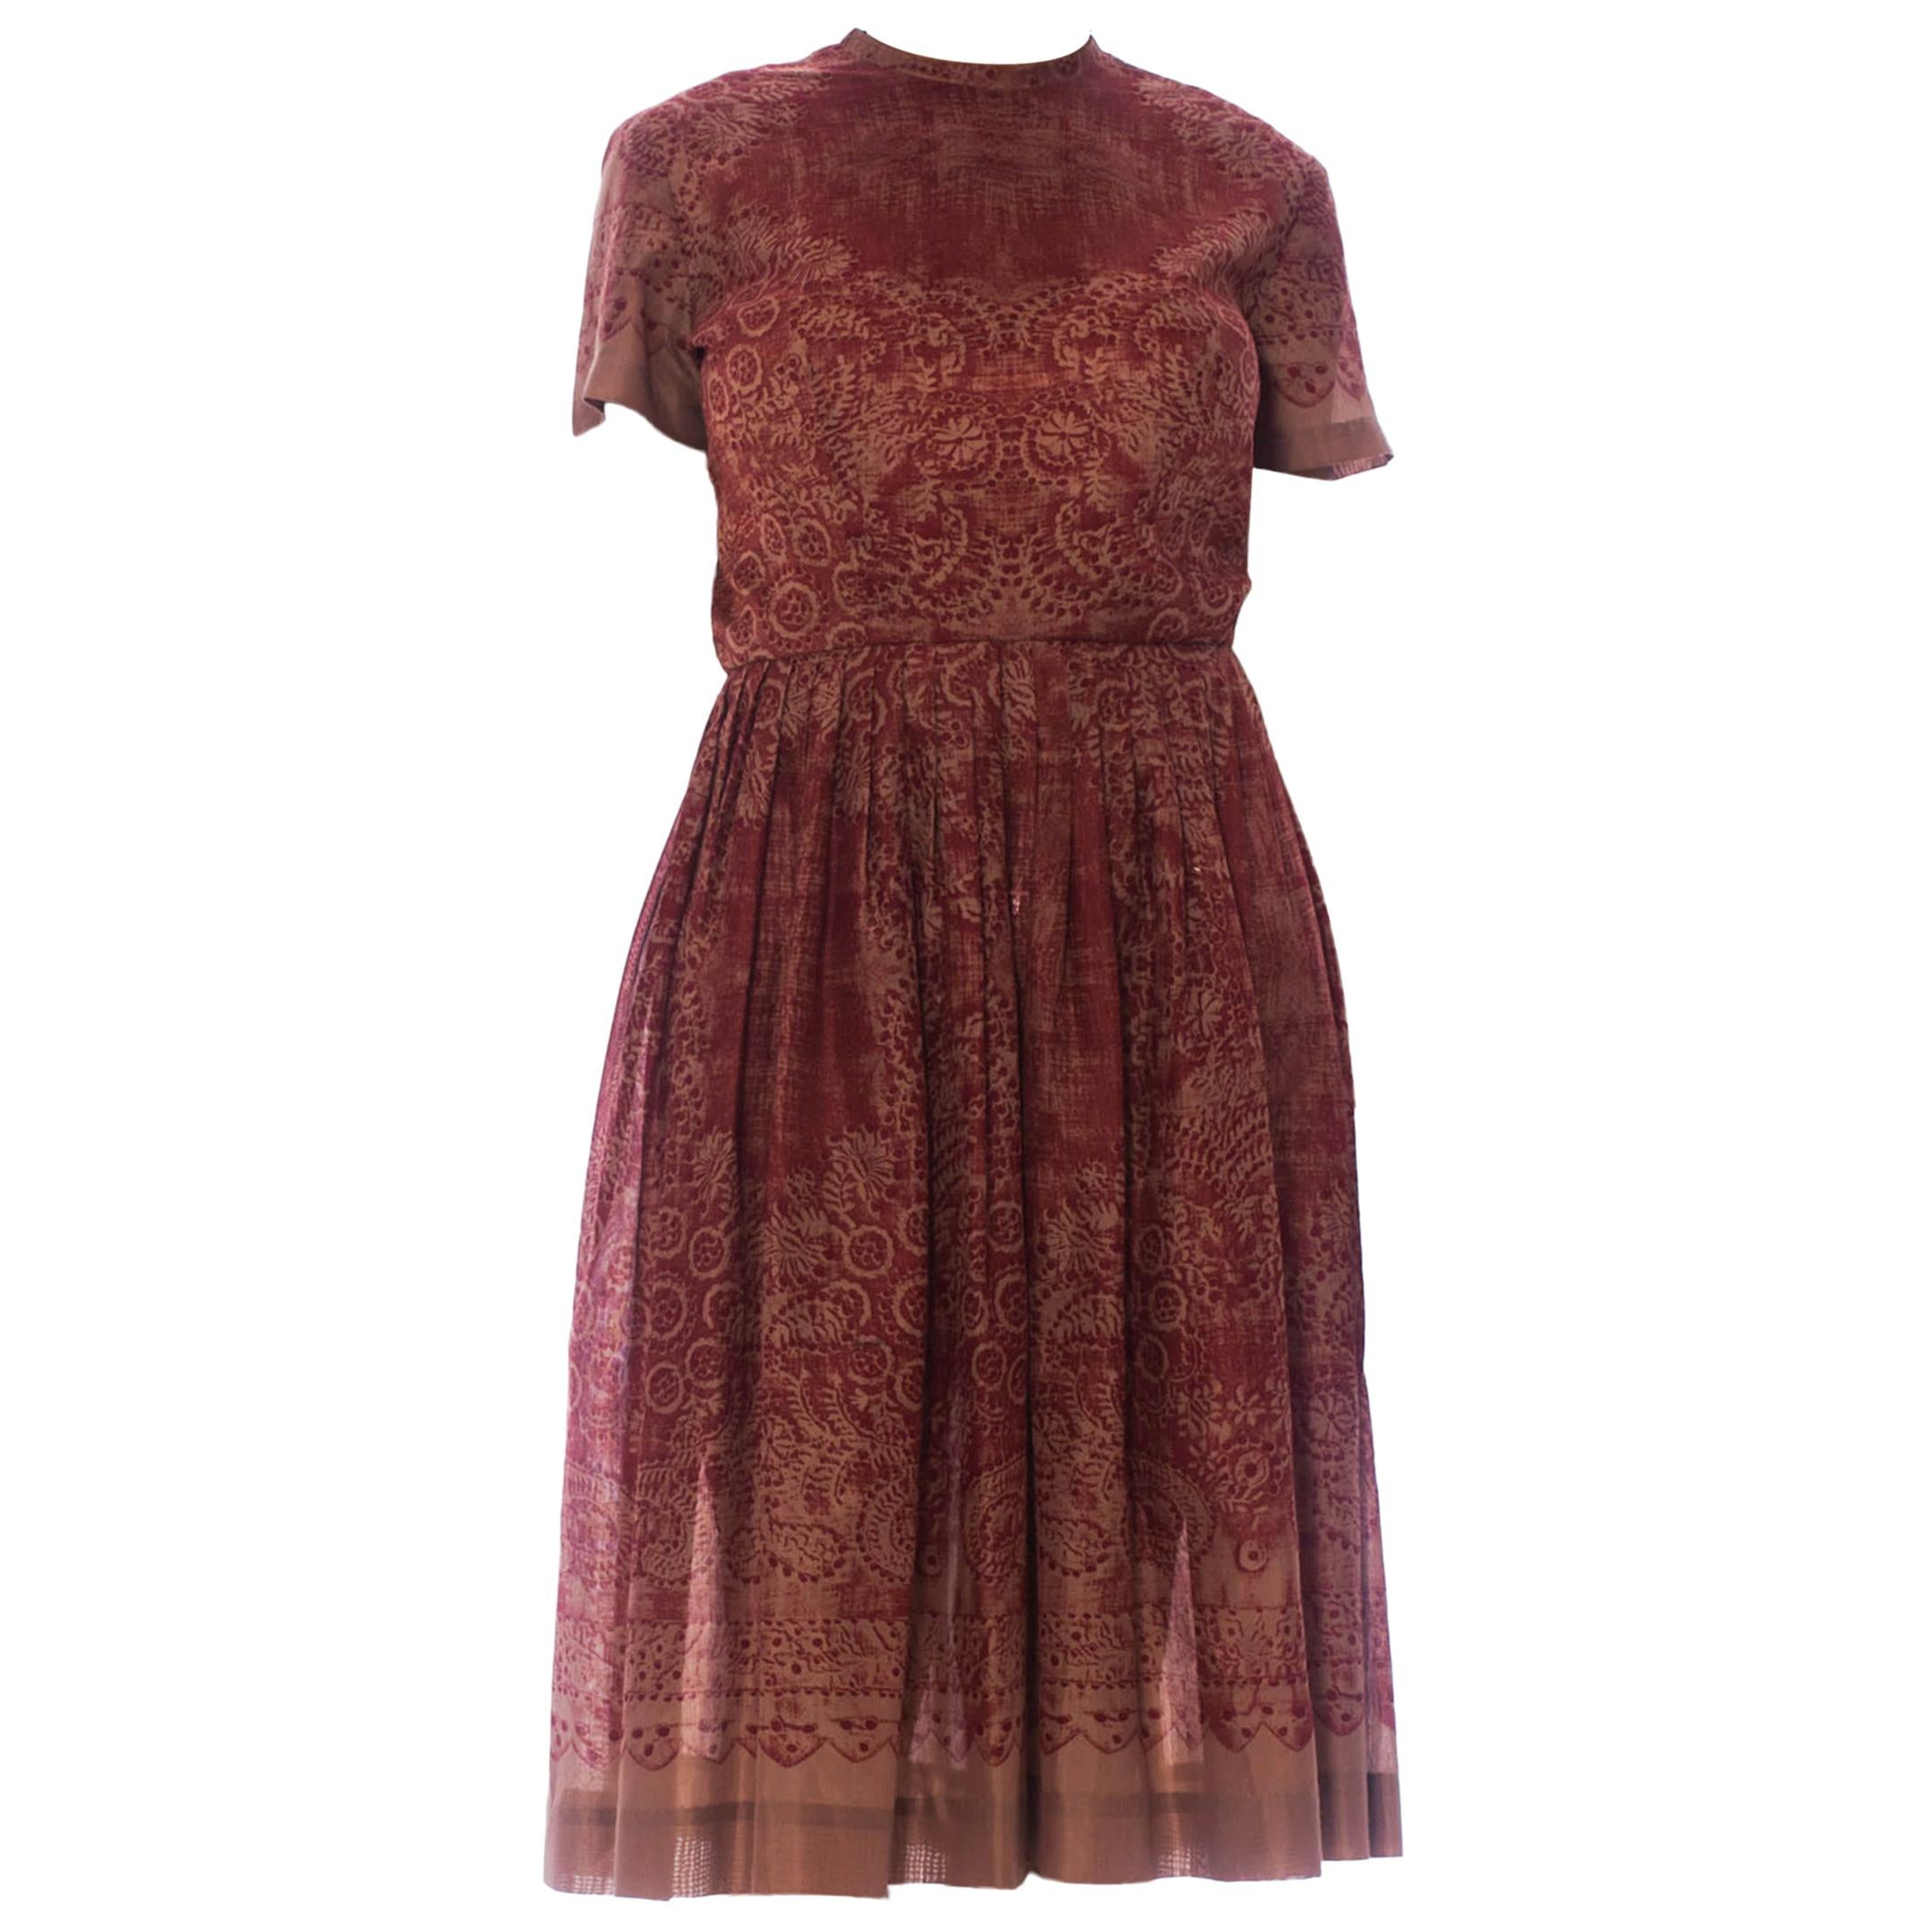 1960S Burgundy & Brown Poly Blend Lace Printed Dress